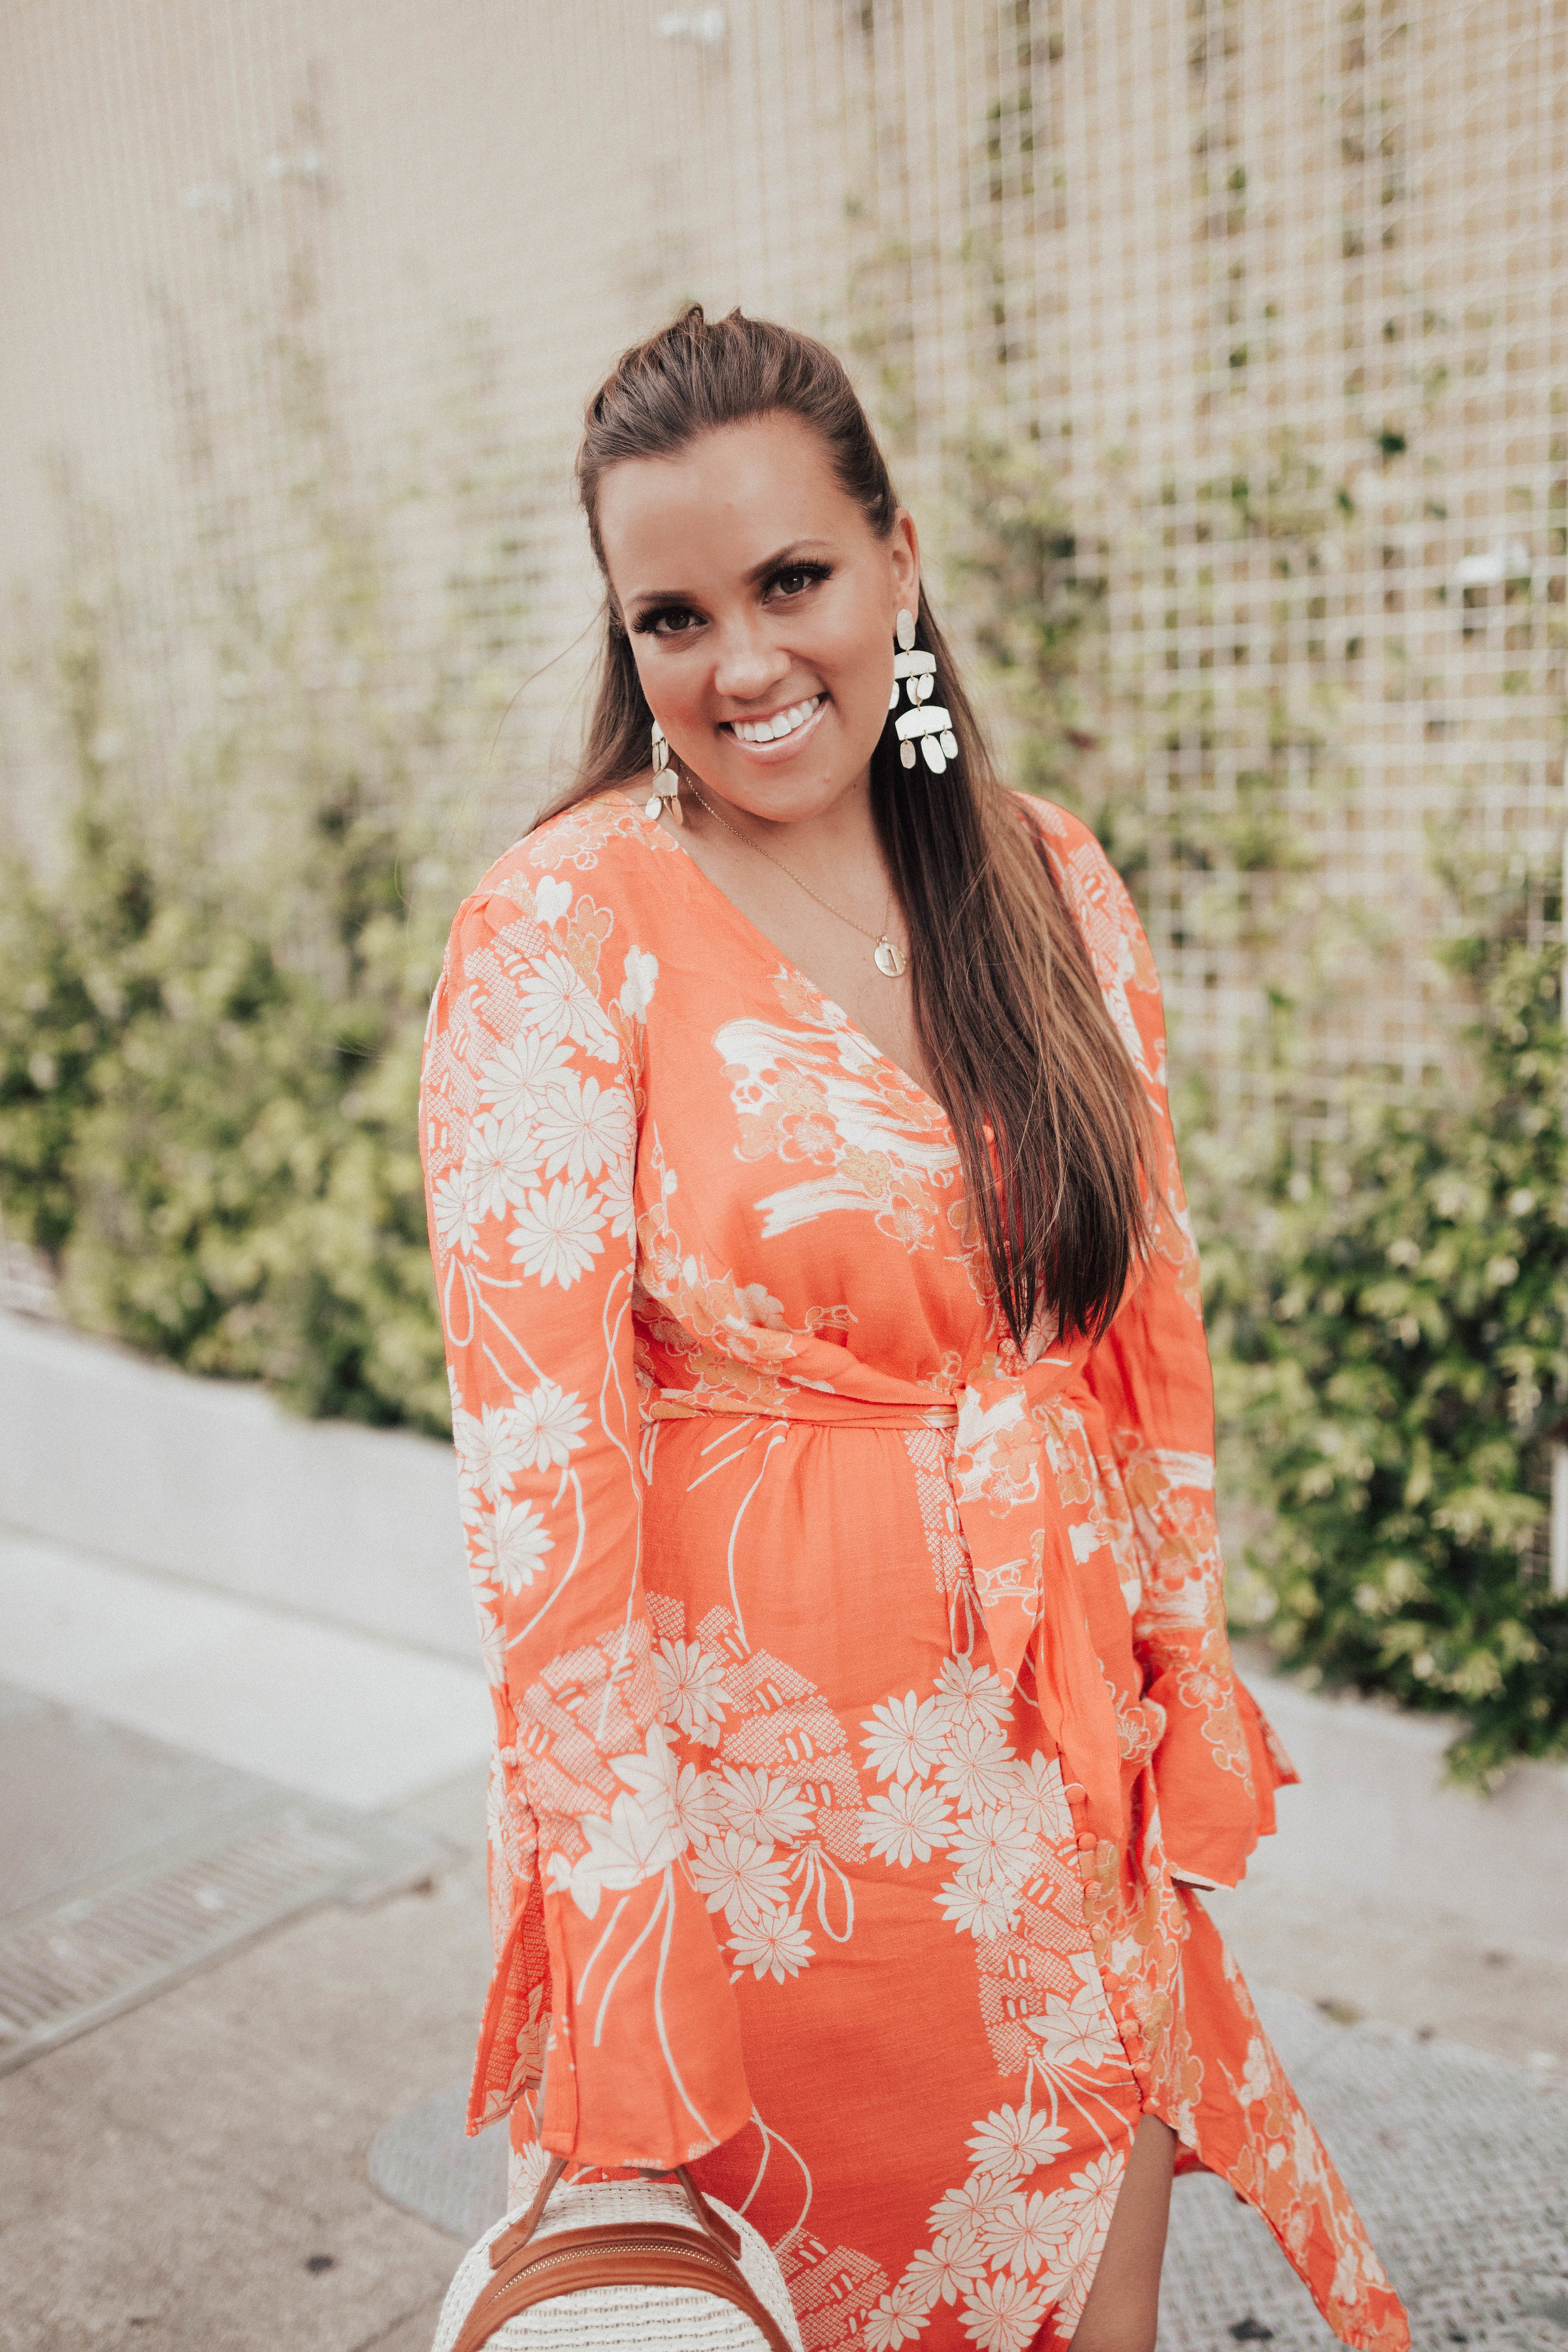 Ashley Zeal from Two Peas in a Prada shares a free people floral print midi dress on sale. 